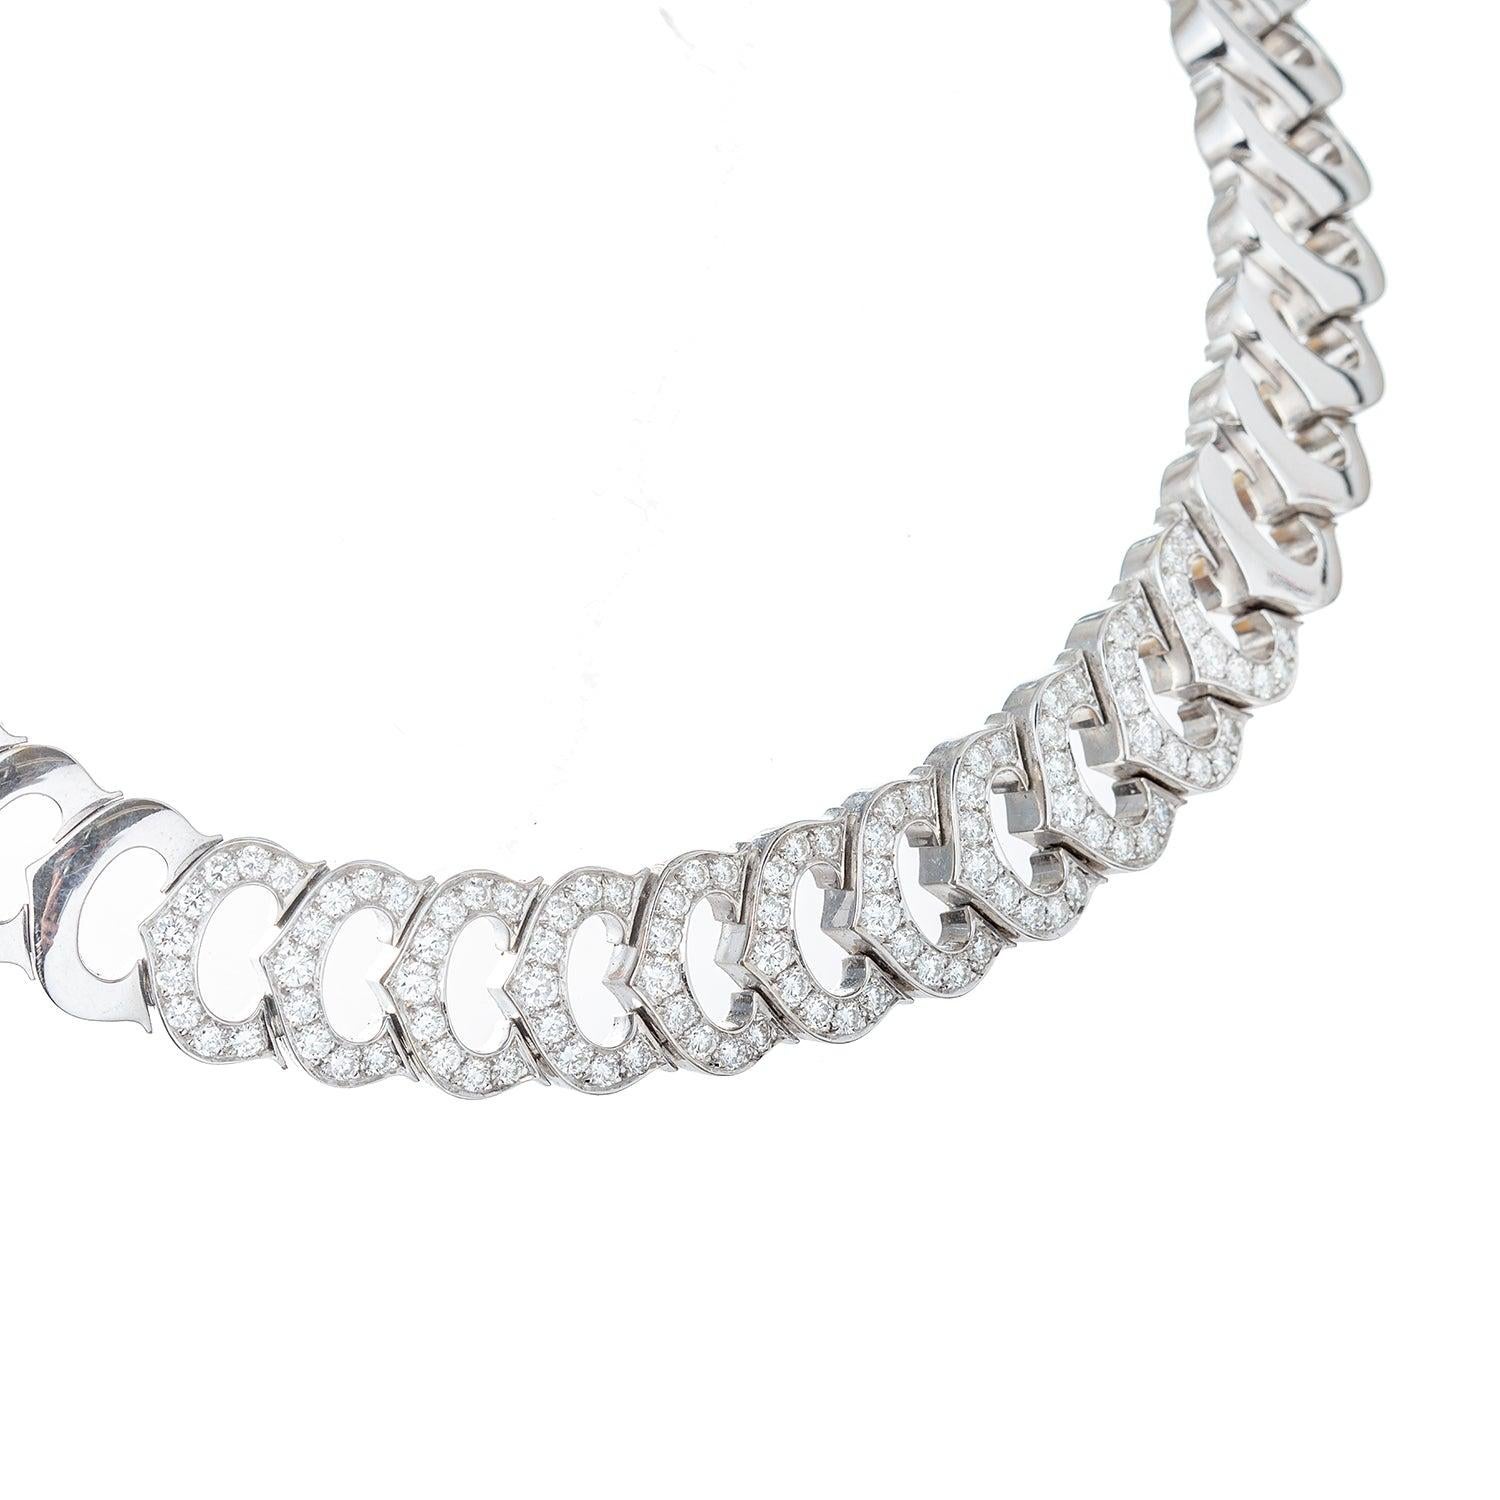 'C' de Cartier collar necklace, featuring horizontally joined 'C' logo motif links in polished 18k white gold accented by eleven links at center set with round brilliant-cut diamonds.

99 diamonds weighing approximately 4.29 total carats.  Signed